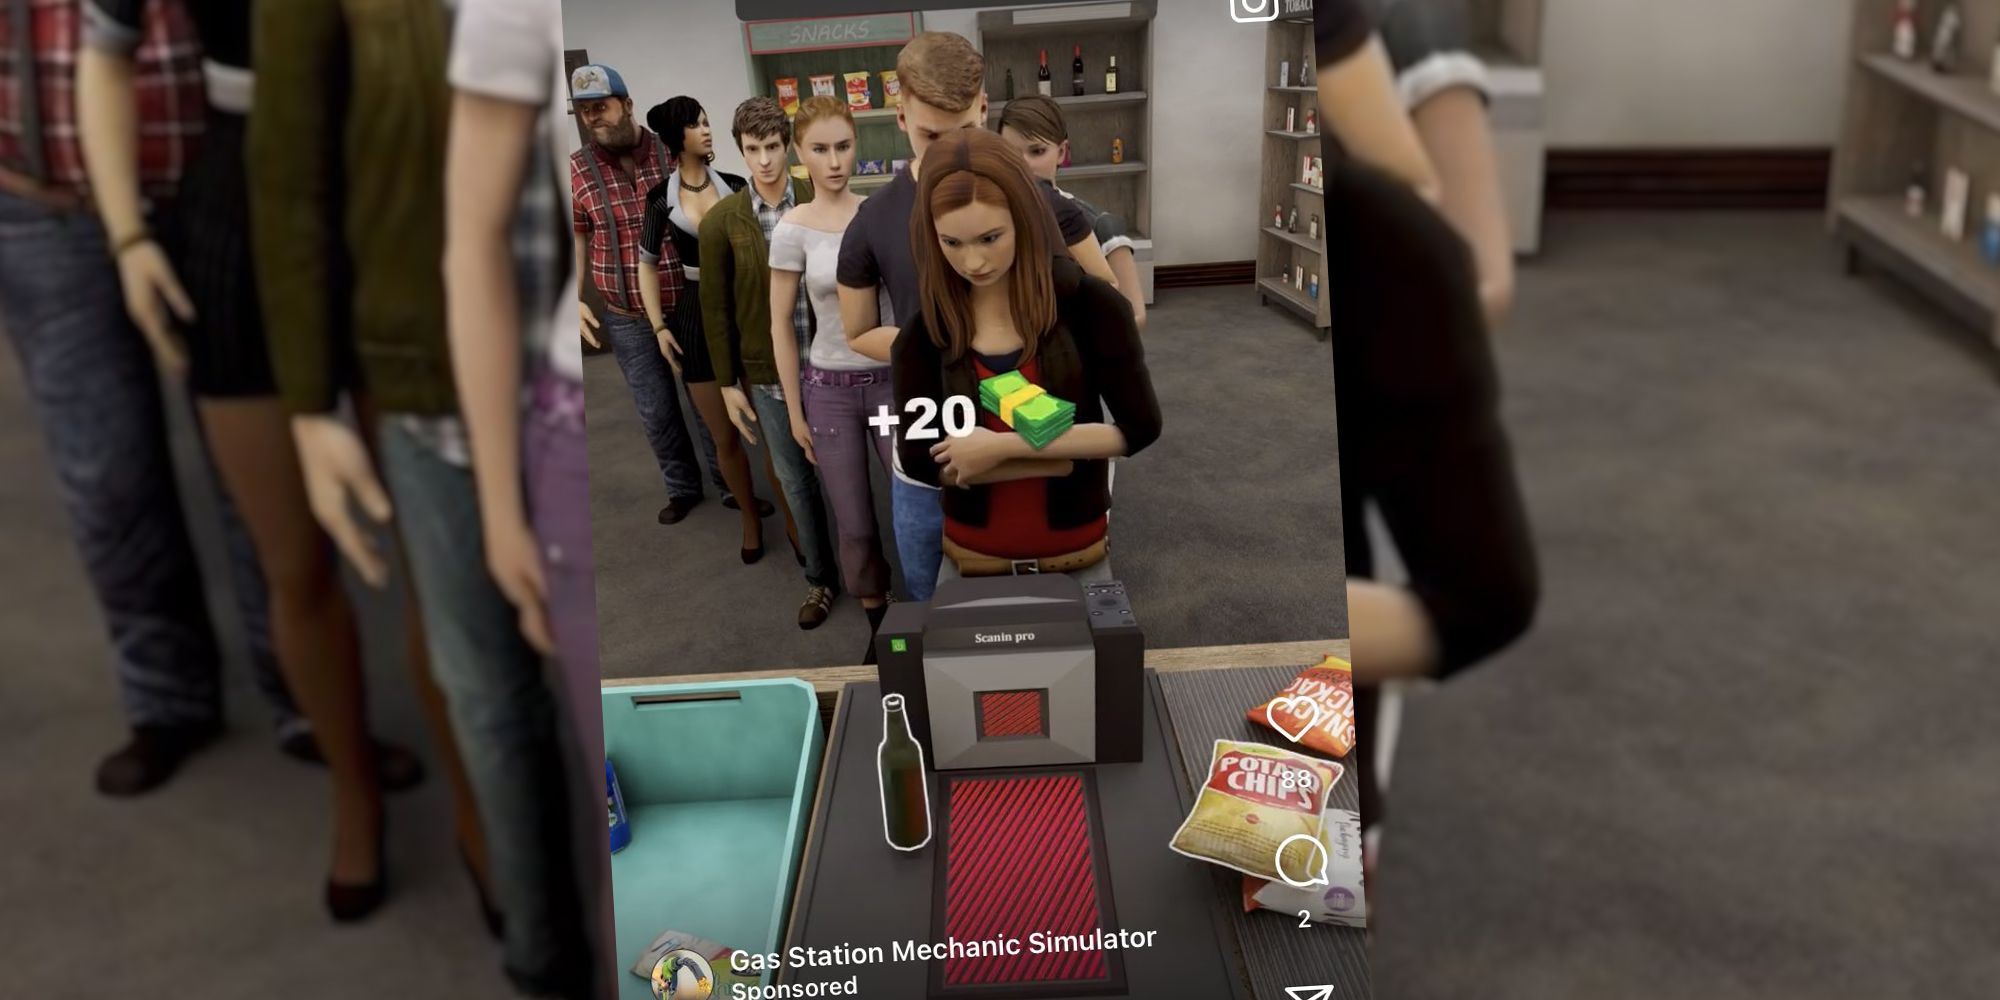 Doctor Who Amy Pond in Gas Station Mechanic Simulator ad buying potato chips while a queue waits behind her